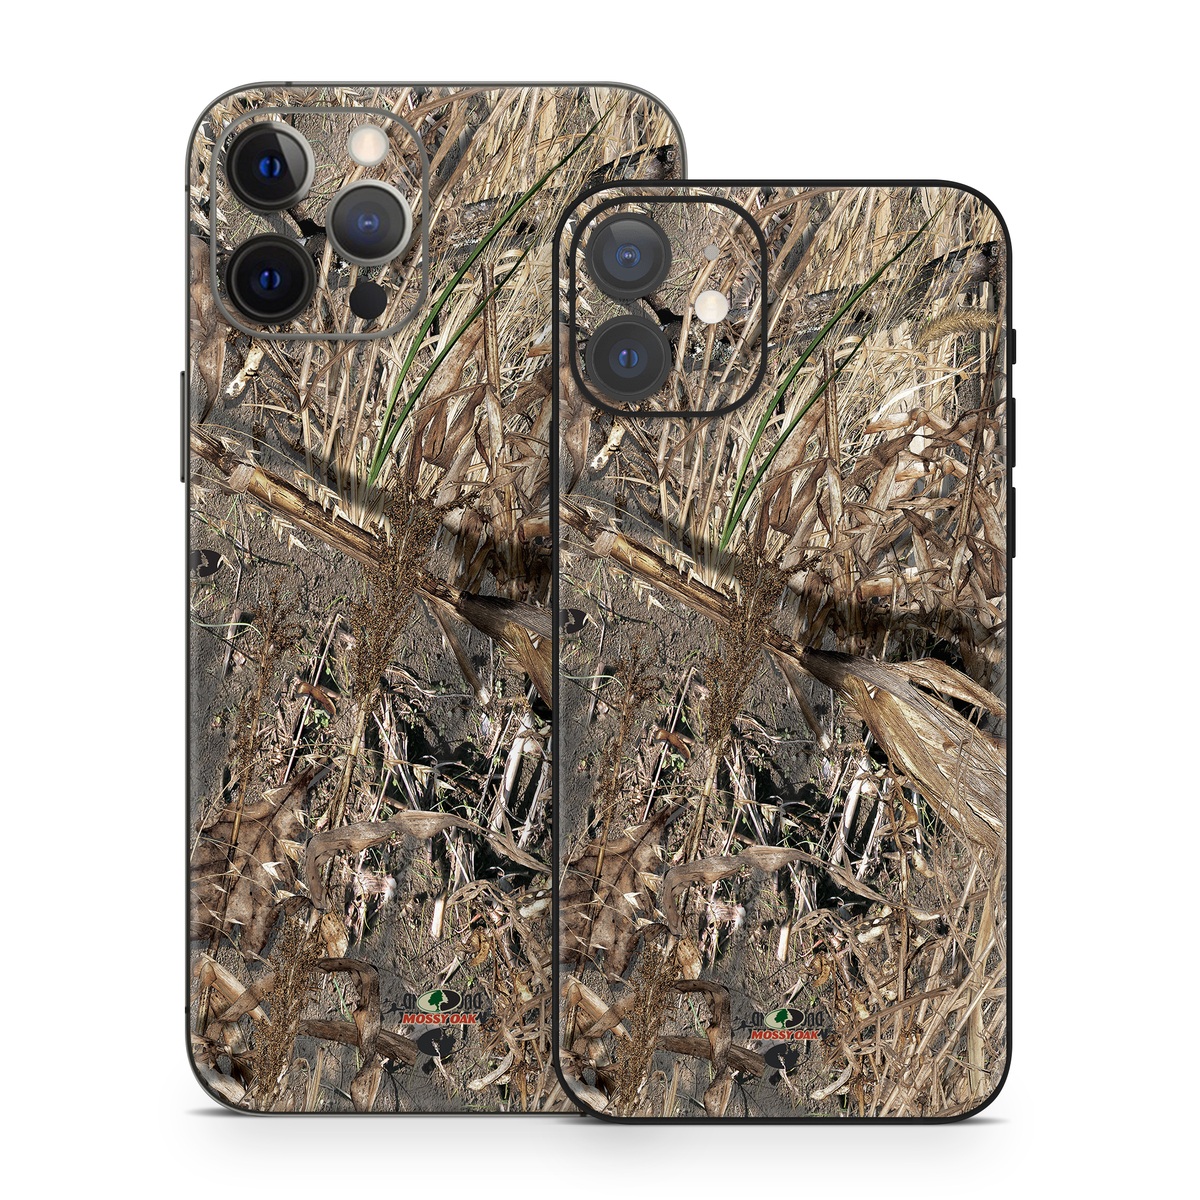 iPhone 12 Series Skin design of Soil, Plant, with black, gray, green, red colors